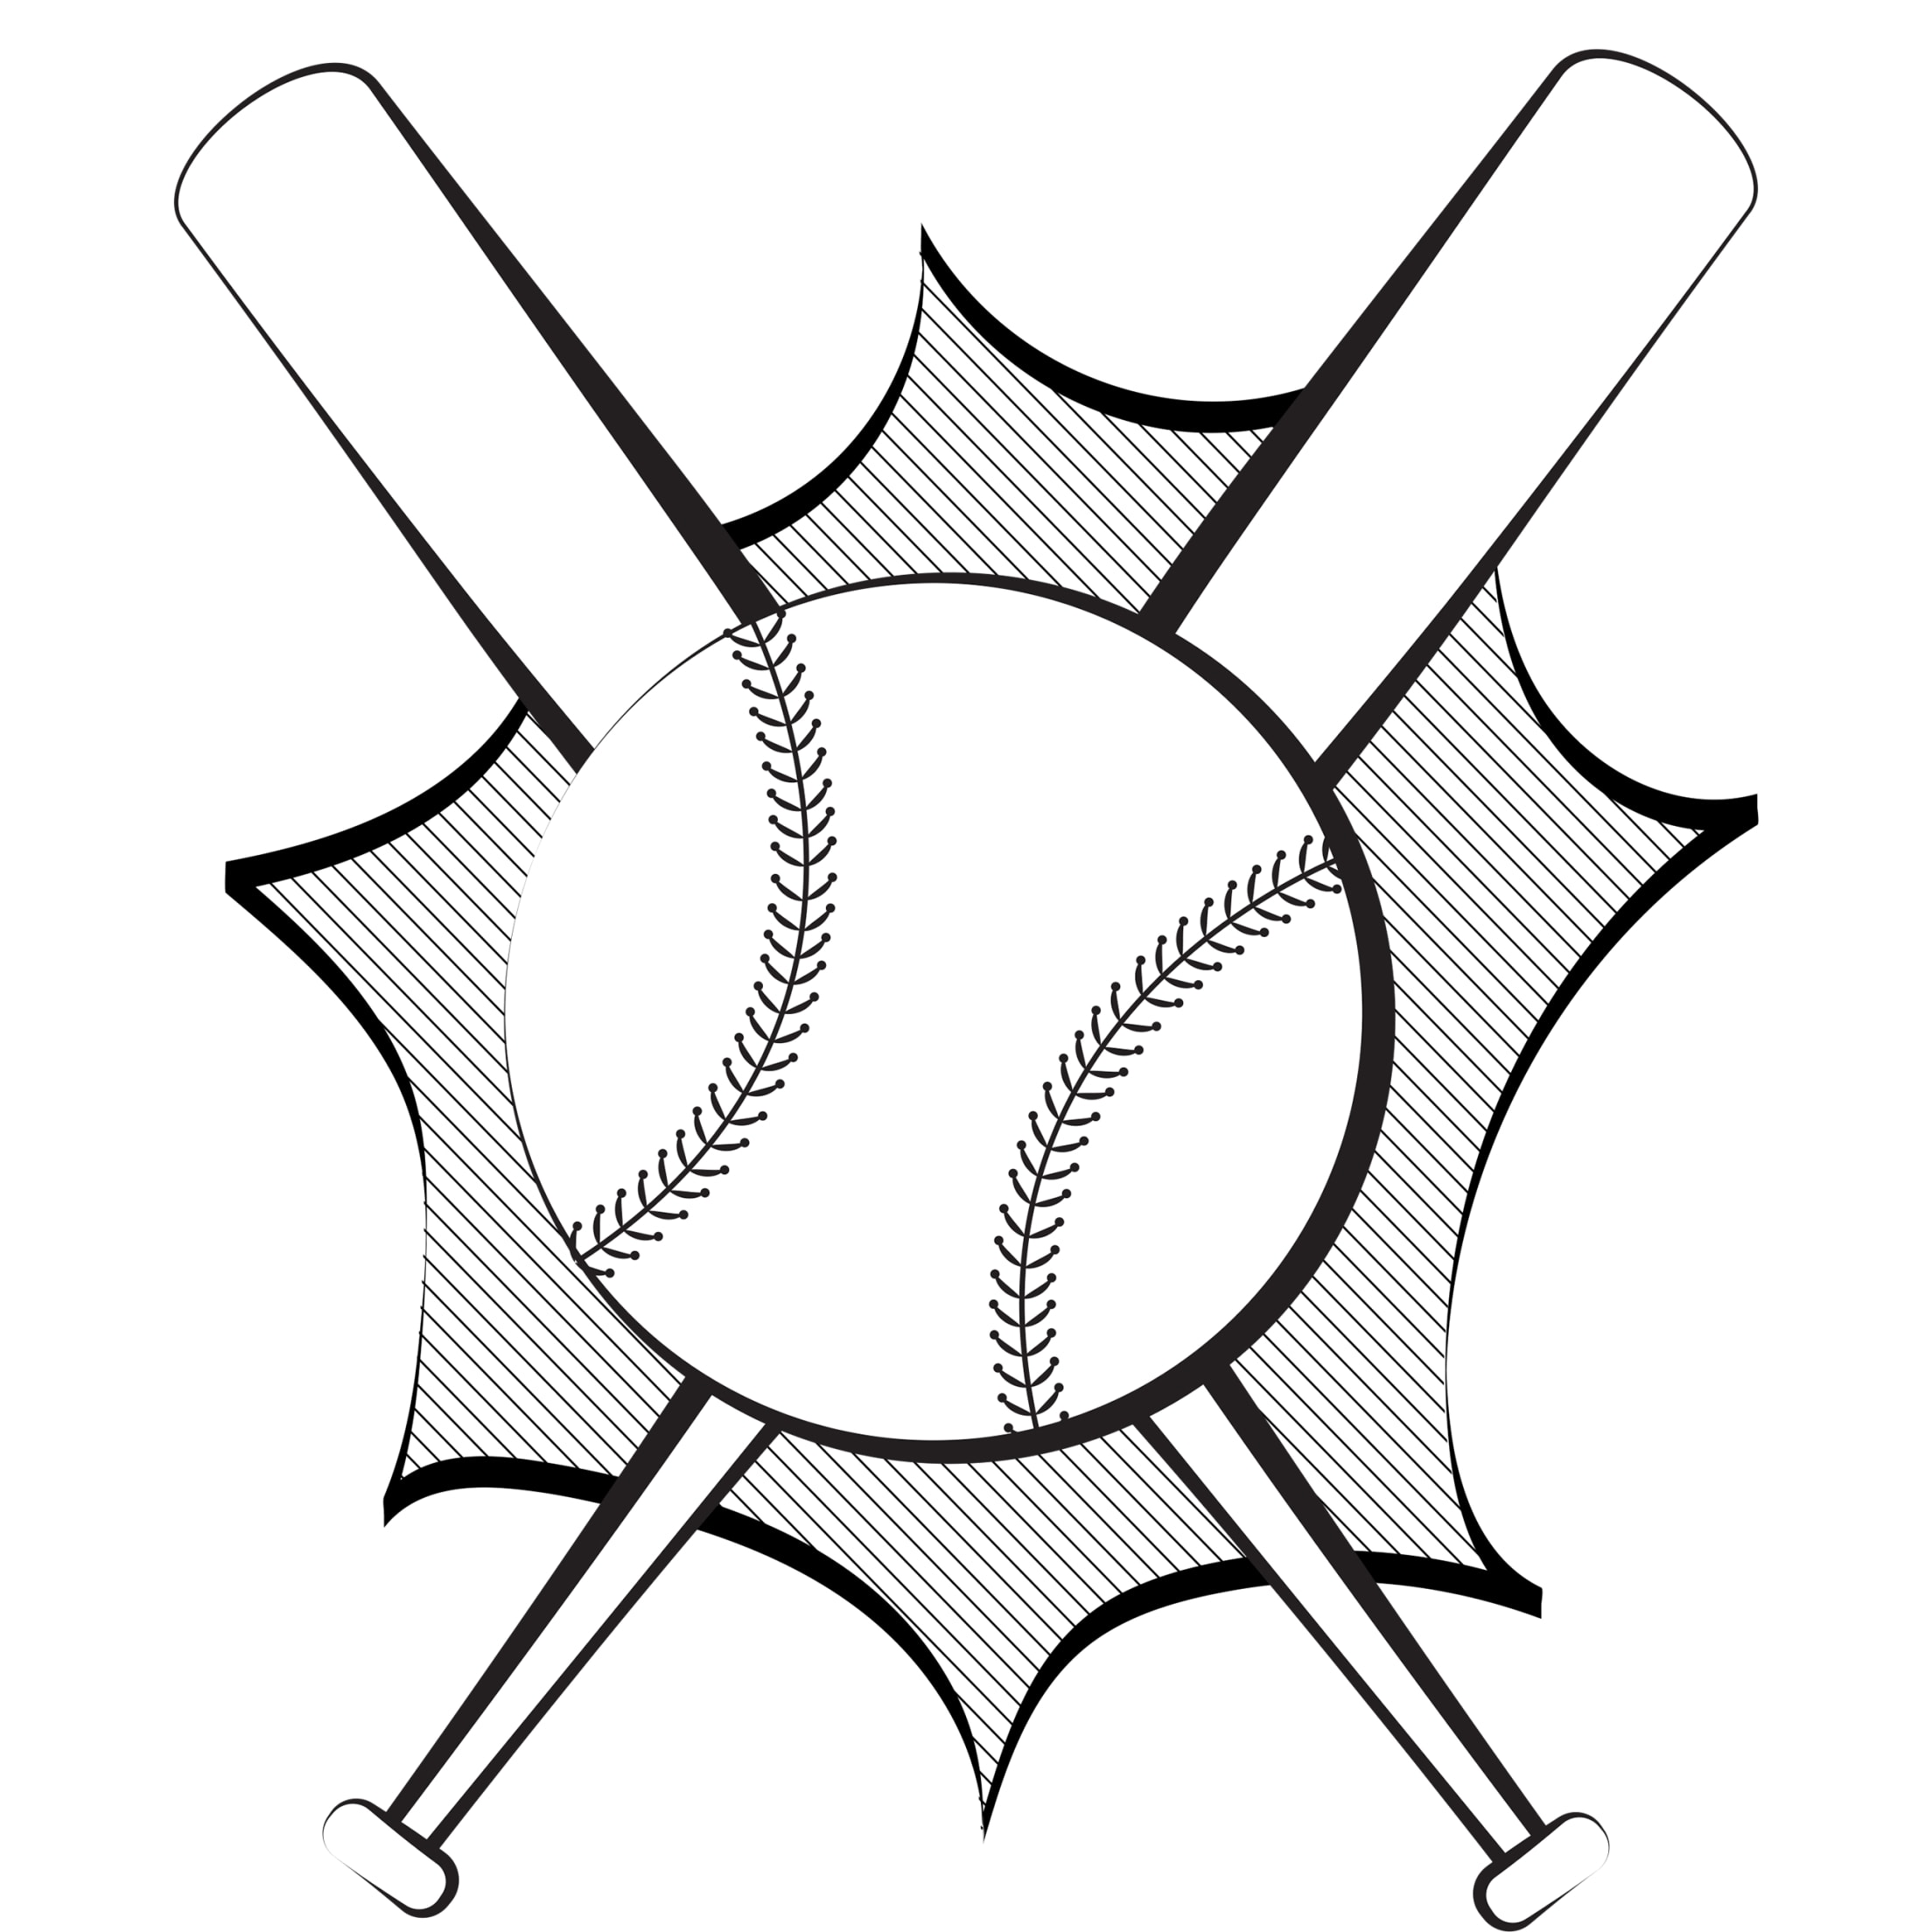 Astros activities coloring pages houston astros